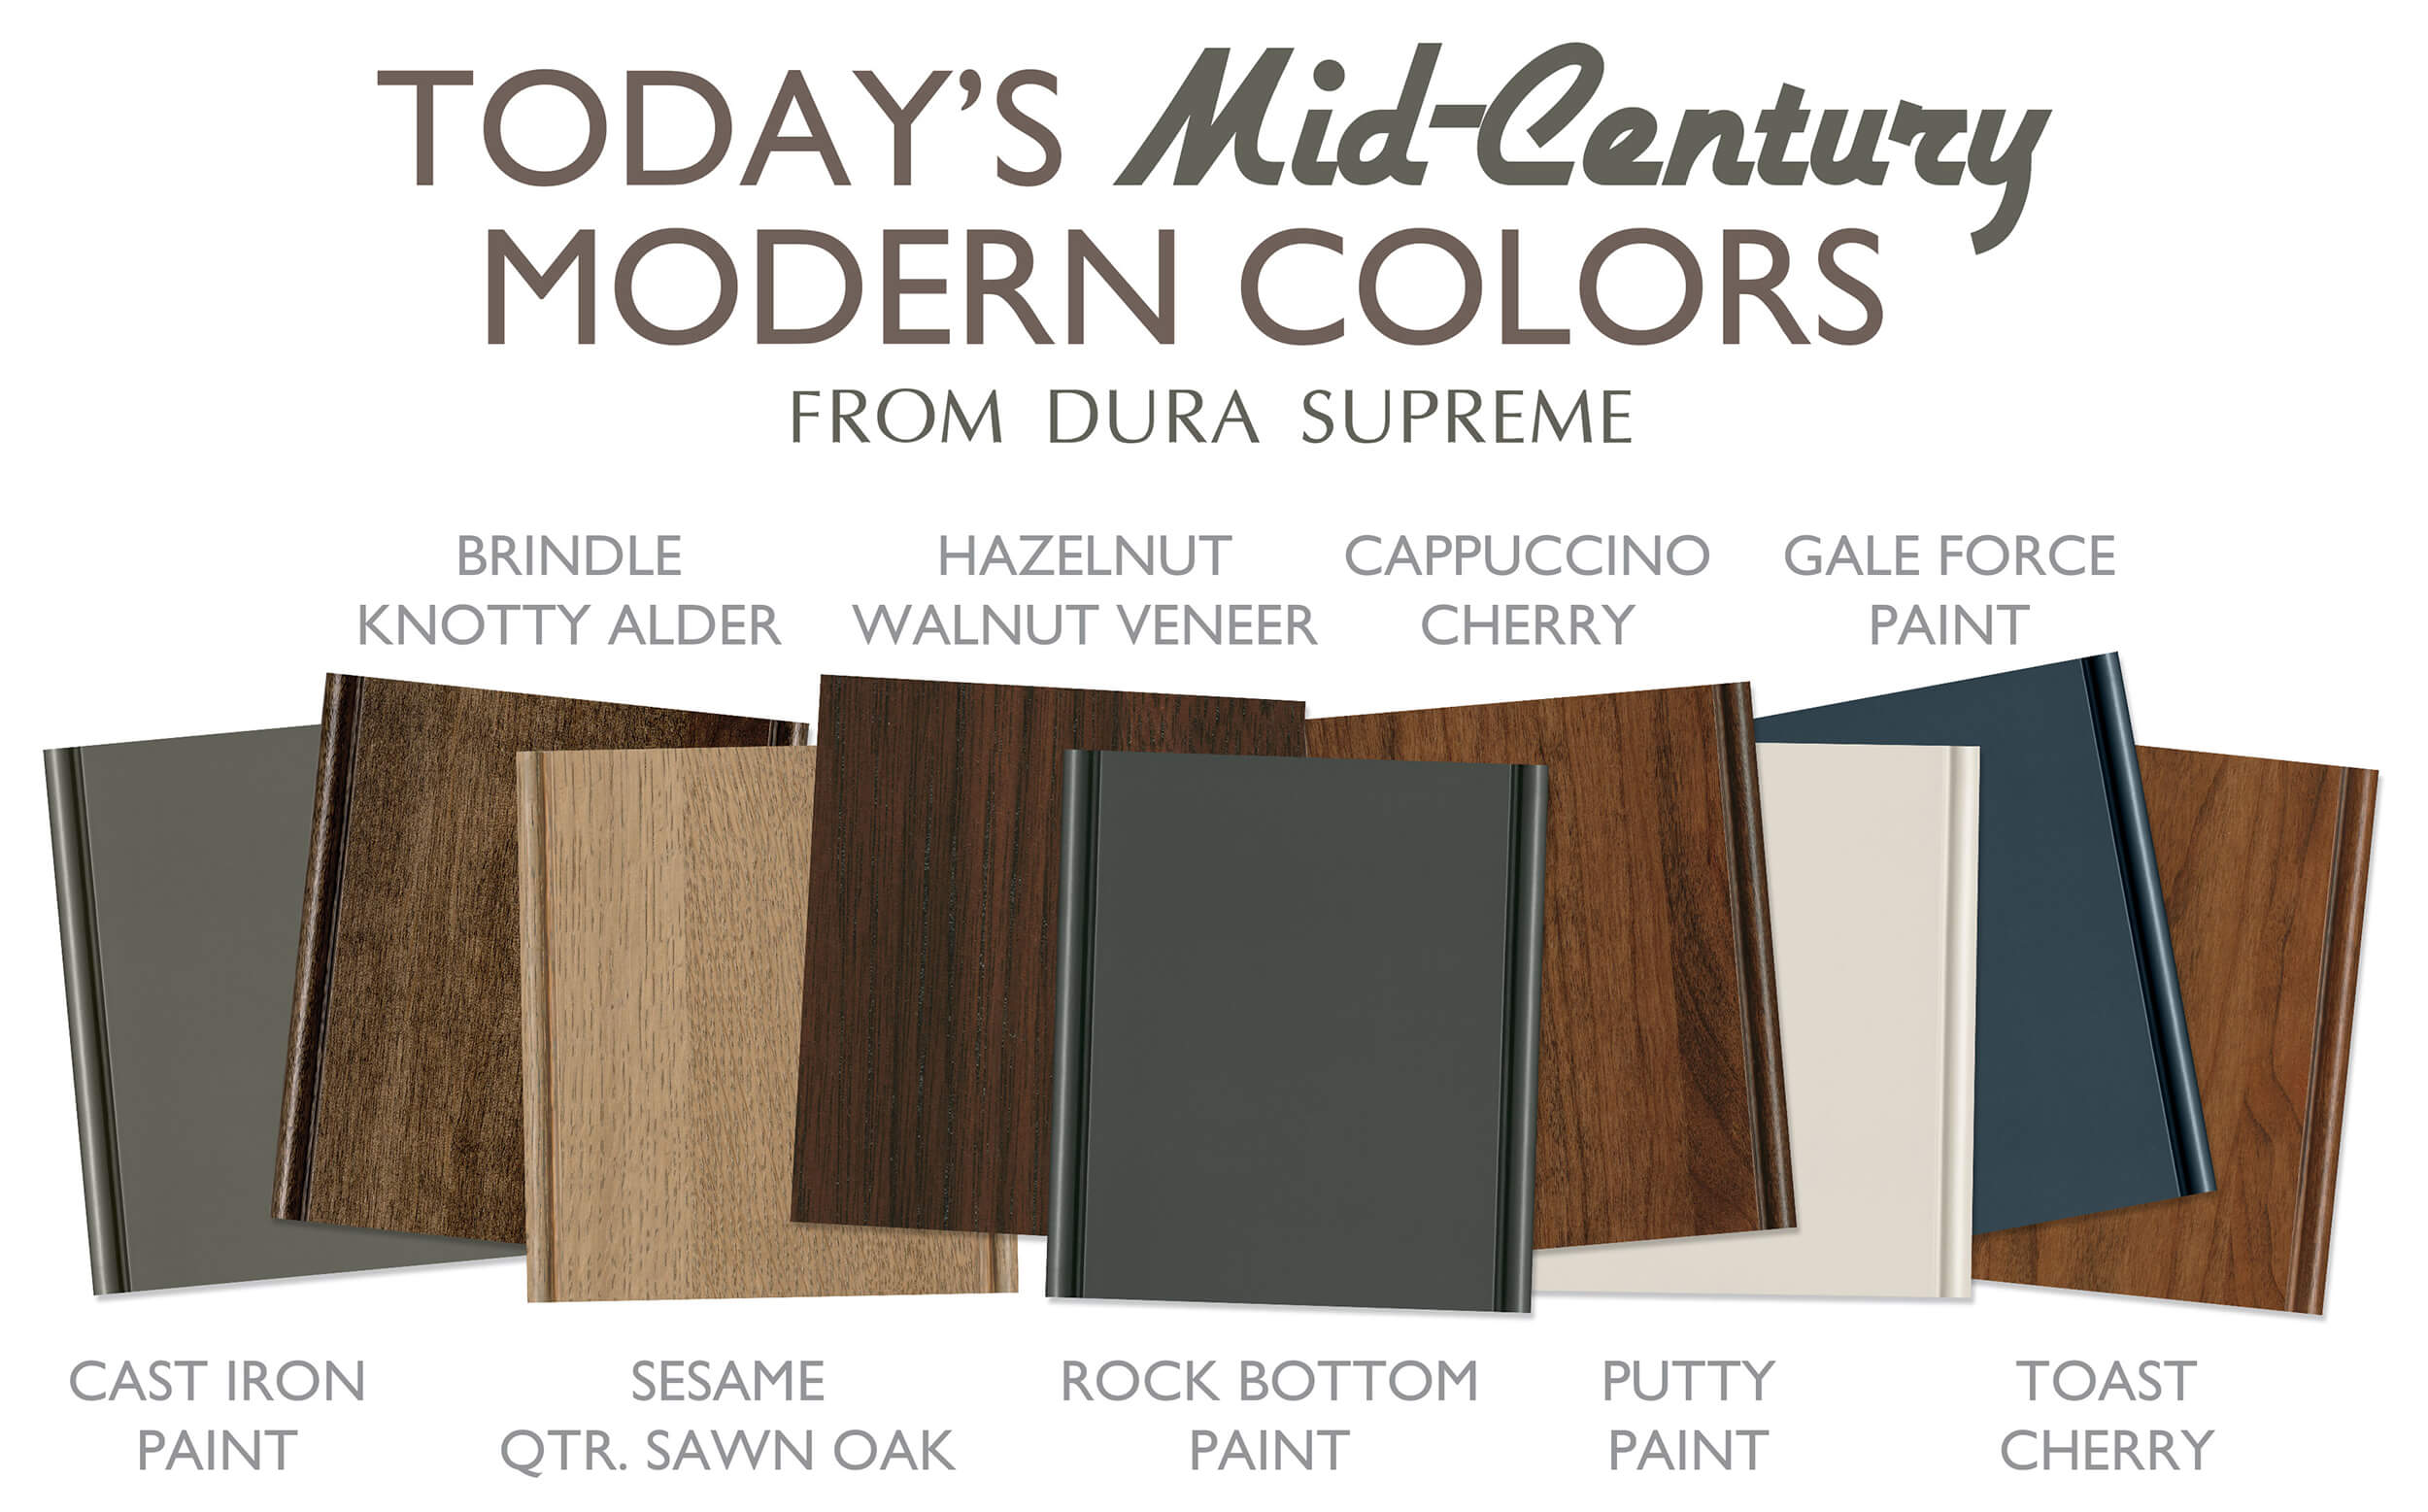 Trendy Mid-Century Modern Kitchen Cabinet Colors from Dura Supreme for a modern day, 21st century look on this classic look.